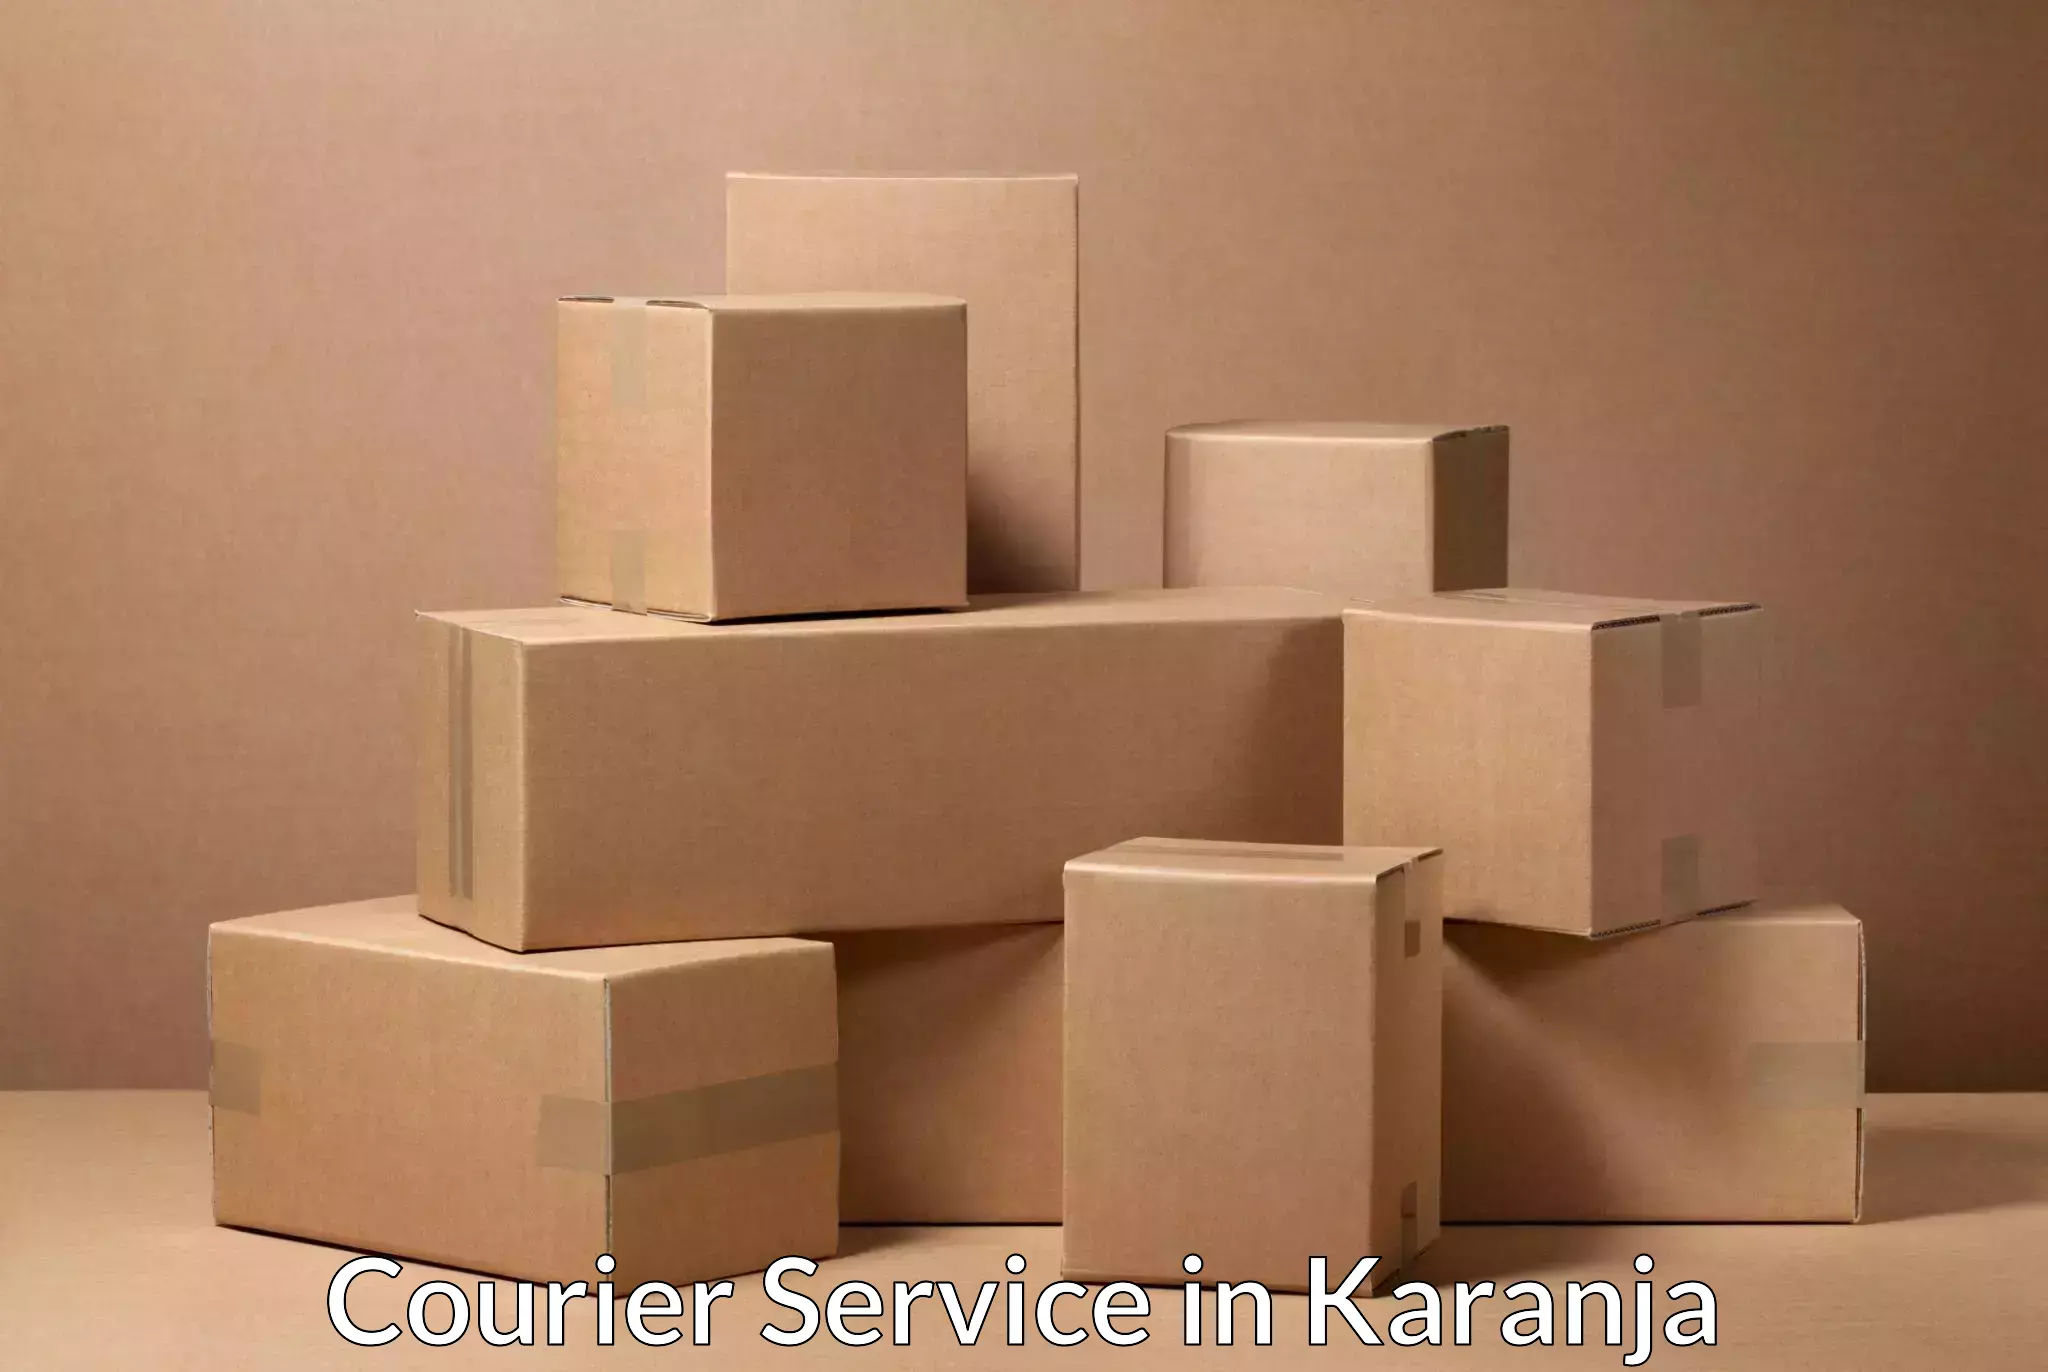 Courier dispatch services in Karanja